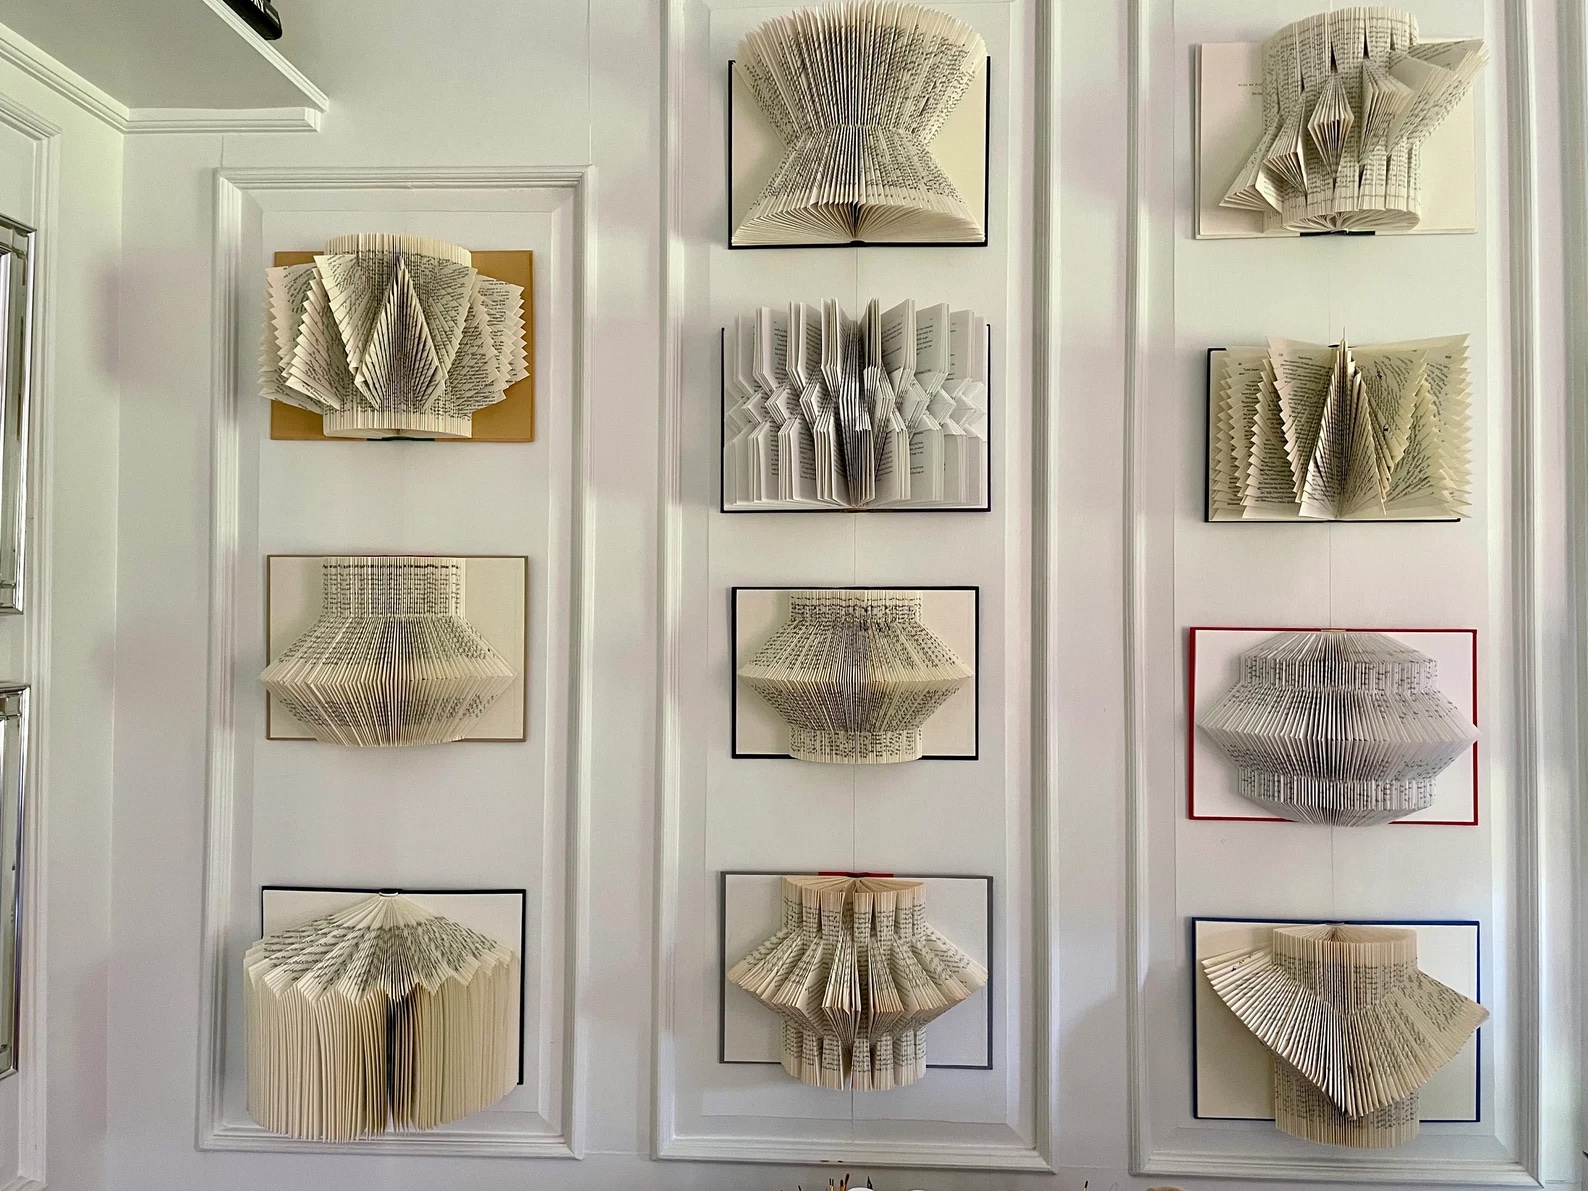 a photo of a gallery wall of books whose pages are folded in different creative ways.